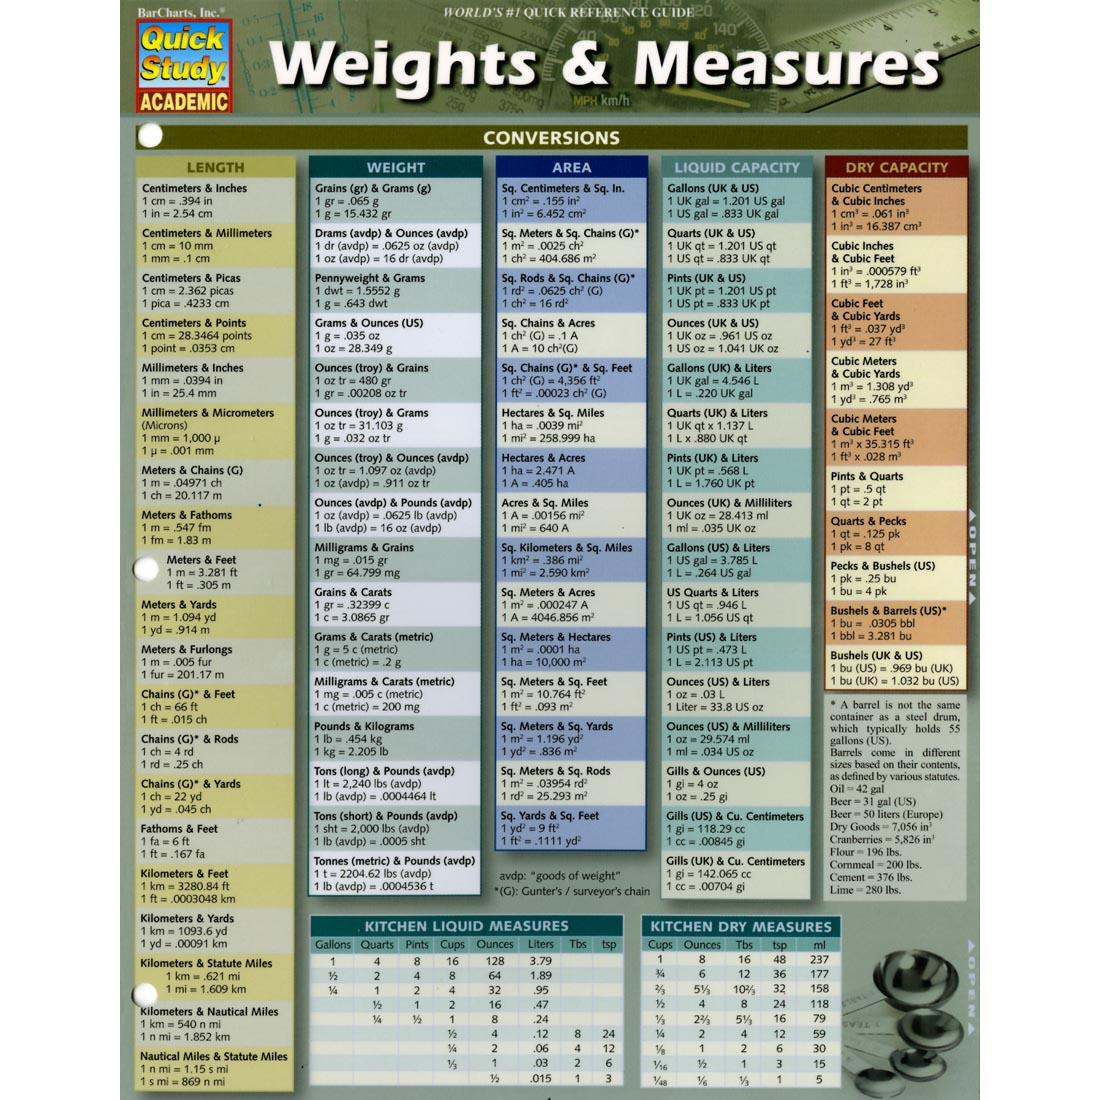 Weights & Measures Reference Guide